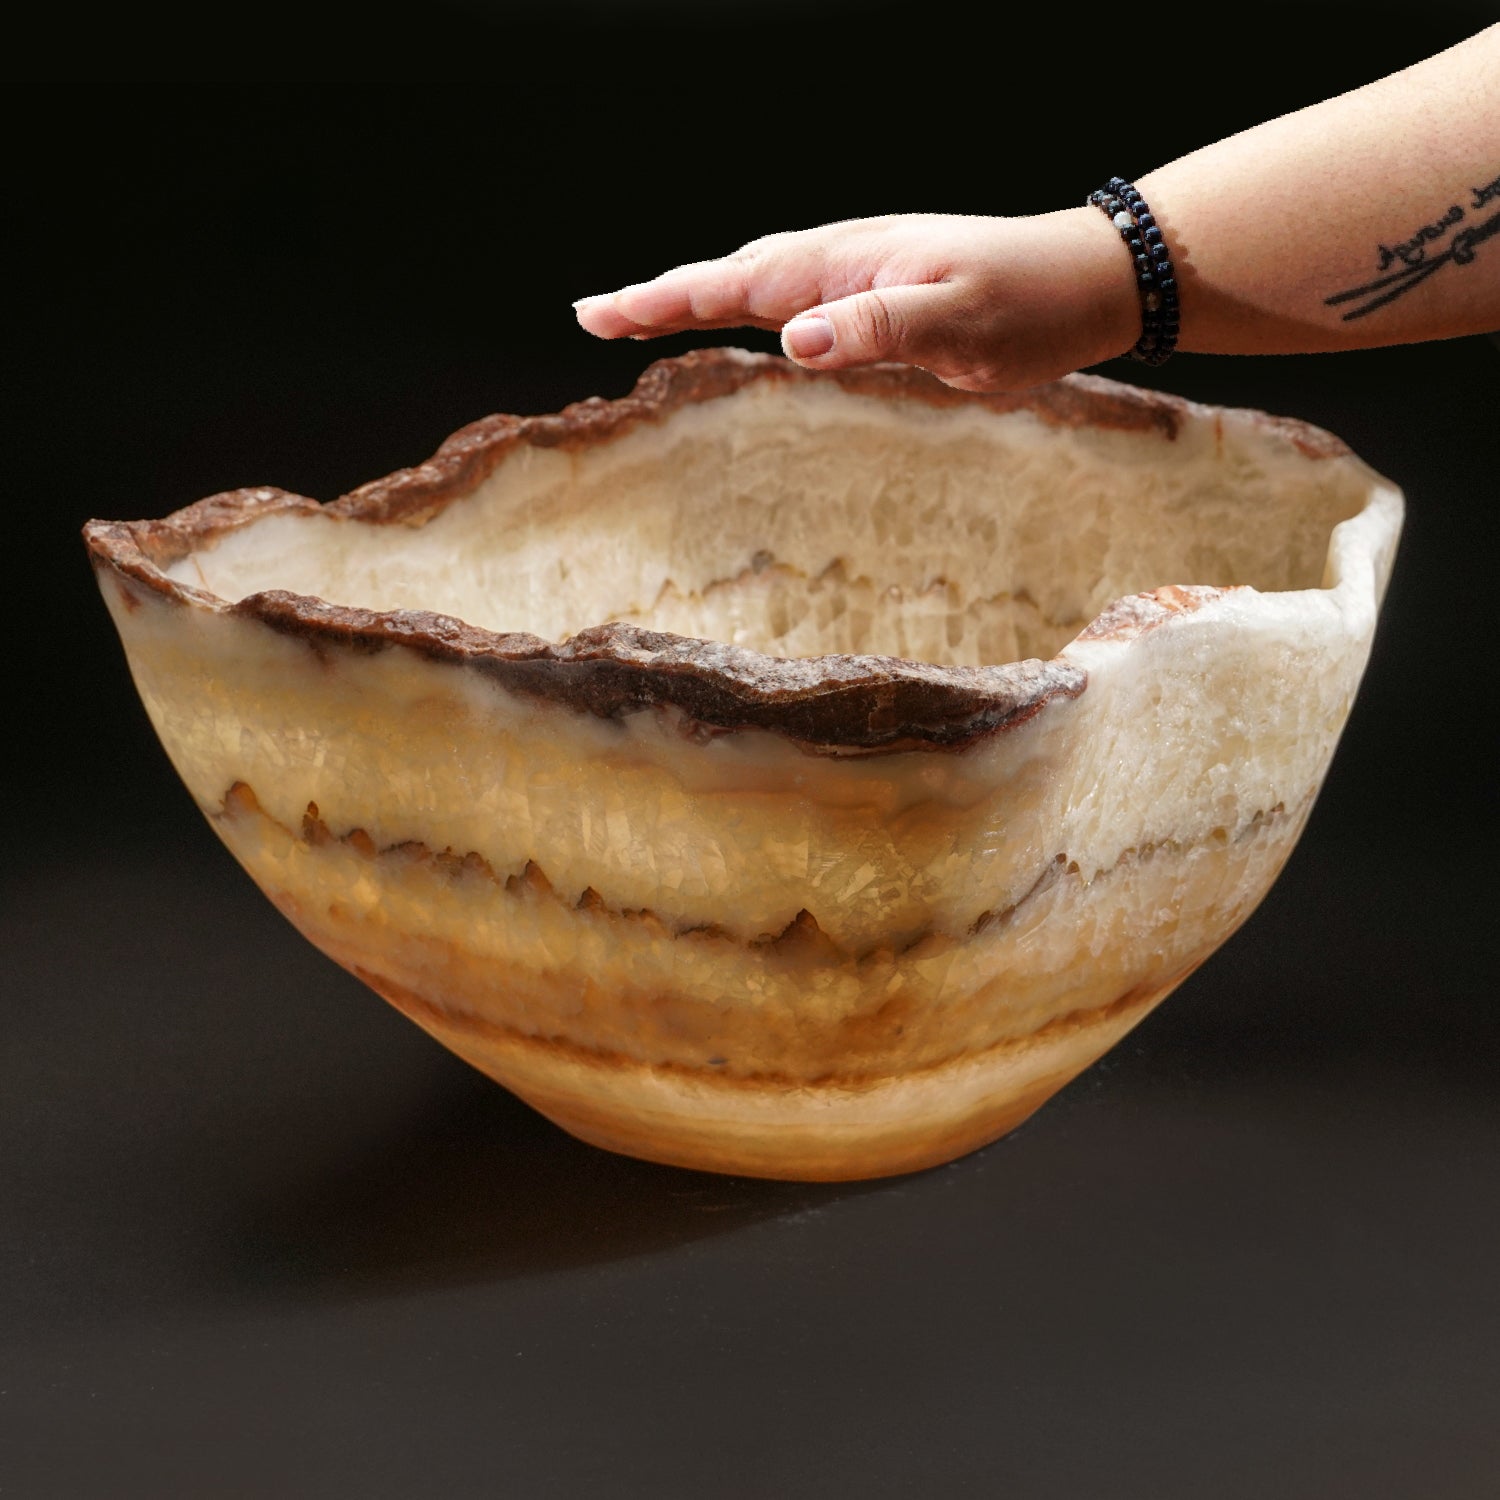 Genuine Polished Onyx Bowl From Mexico (28.8 lbs)